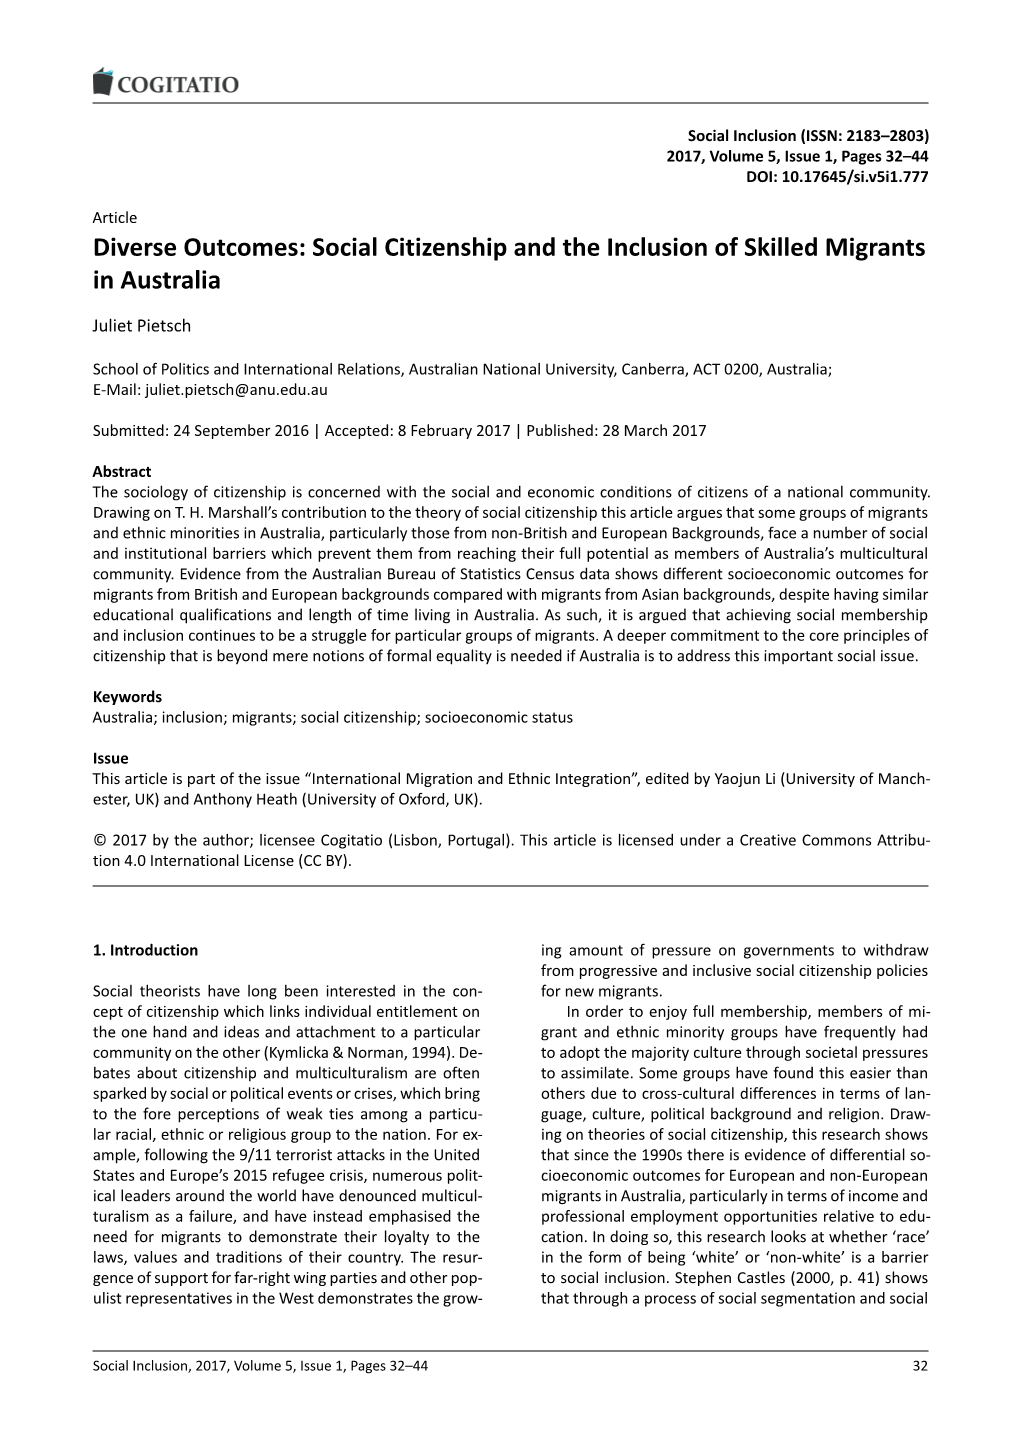 Social Citizenship and the Inclusion of Skilled Migrants in Australia